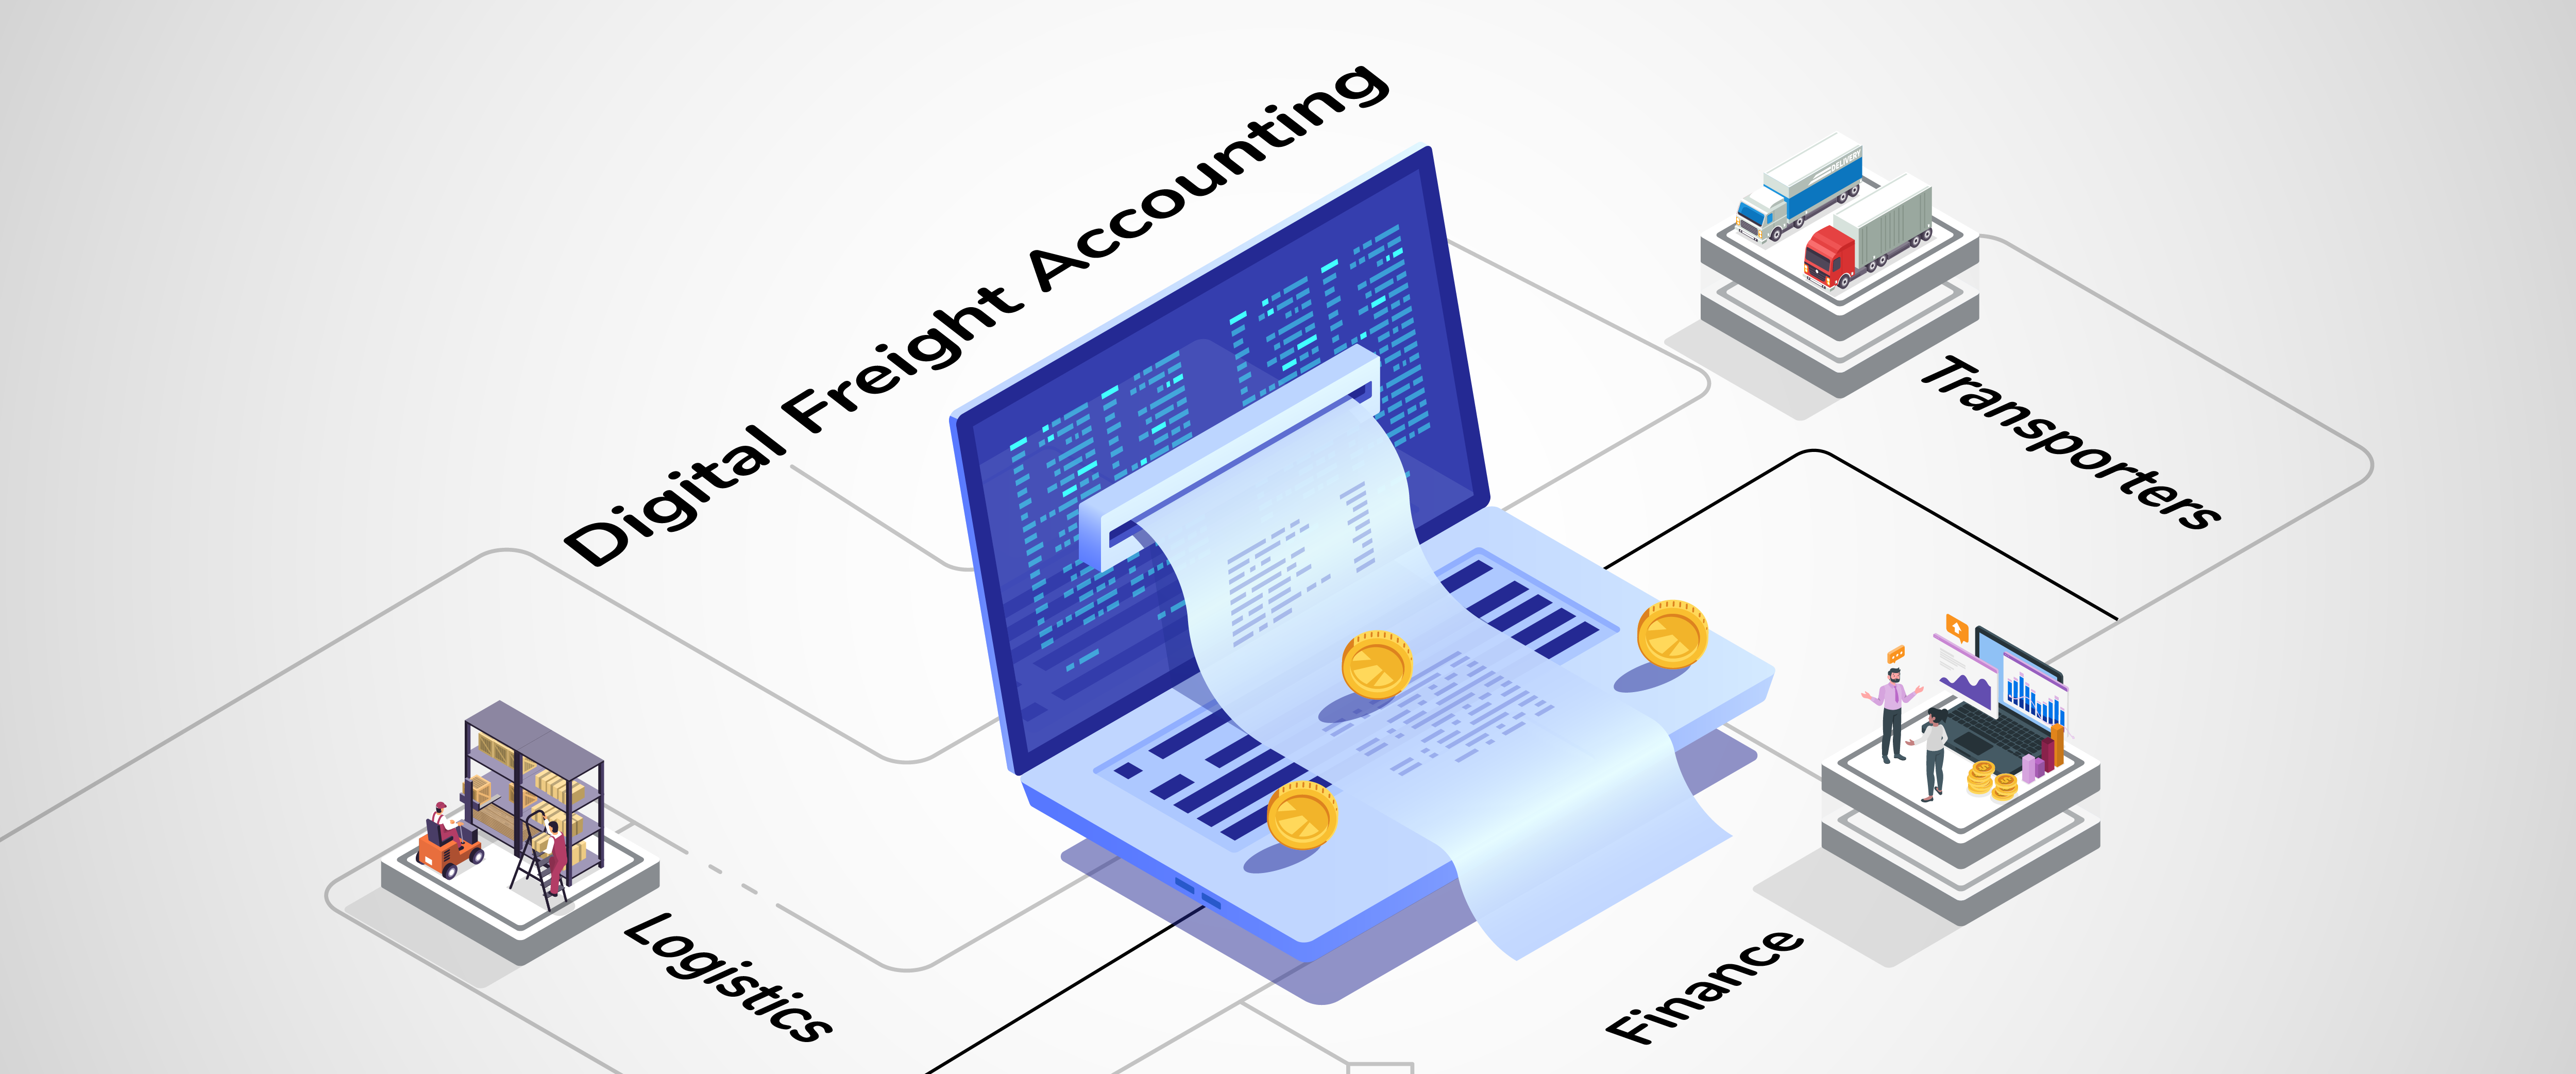 The Impact of Digital Freight accounting on workflow: Logistics, Finance & Transporters